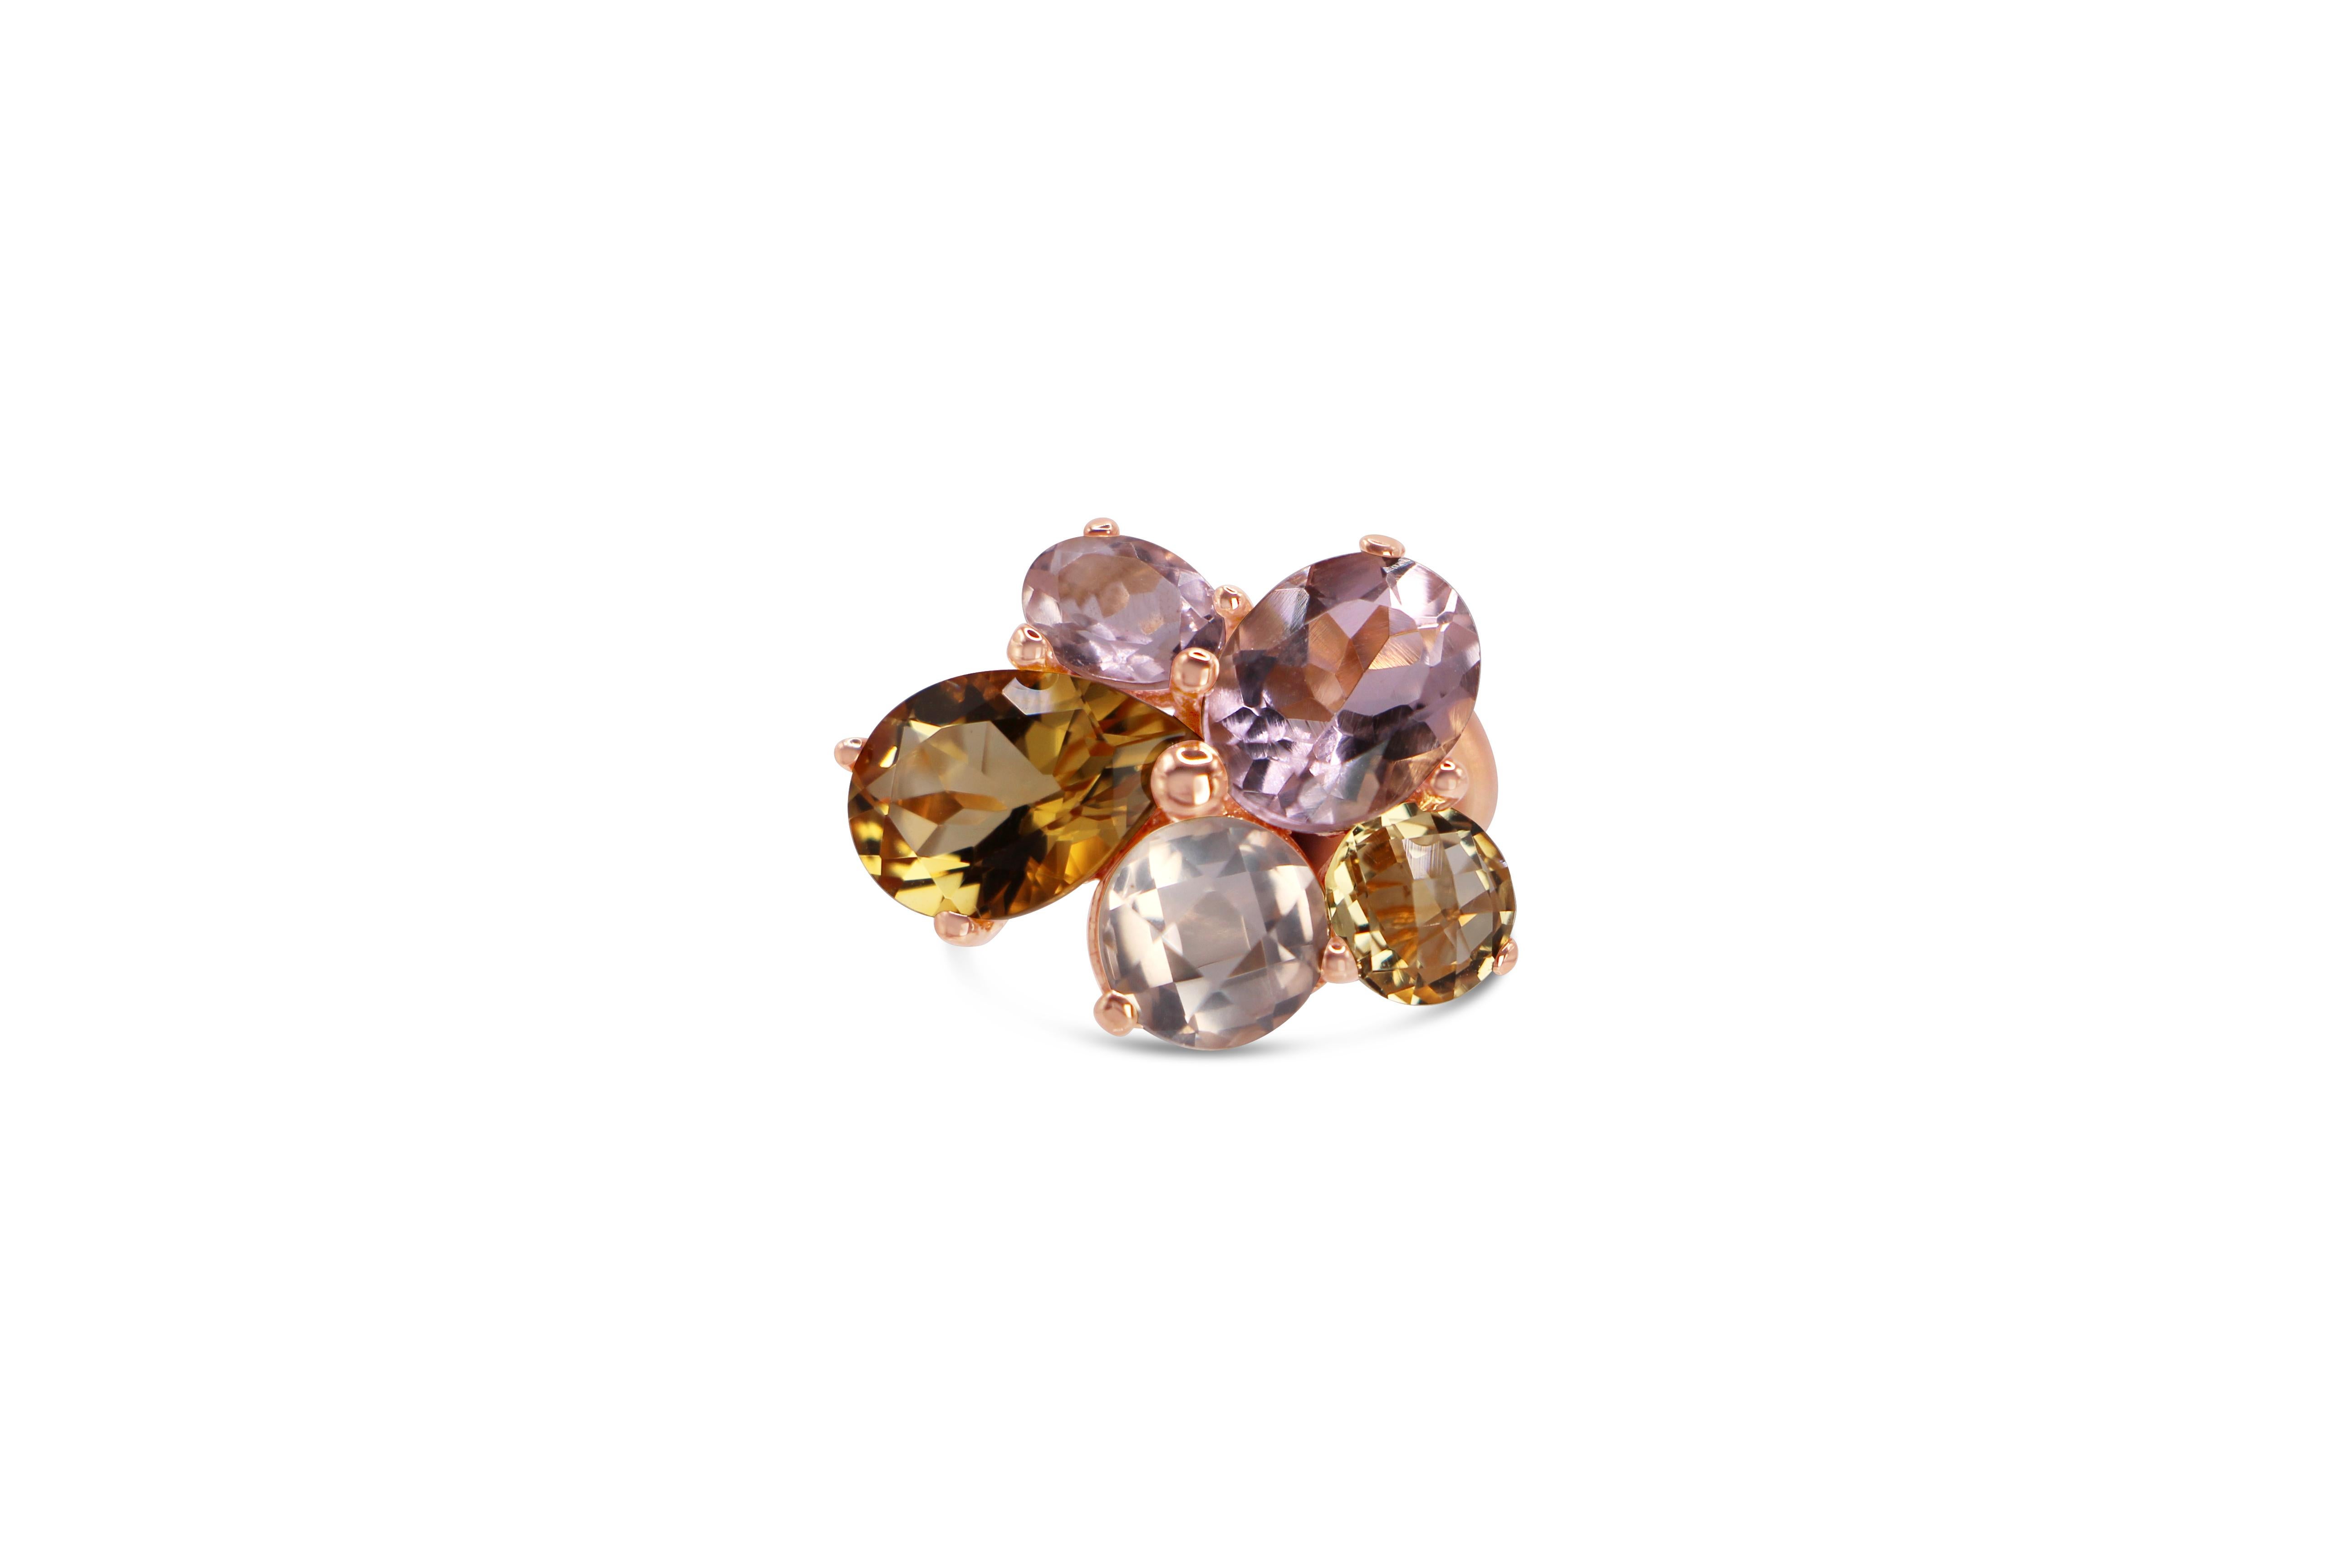 Asymmetrical Cluster floral Ring with Yellow Citrine and Rose Quartz made in 18 Kt Rose Gold
The stones are 10,00 ct mix citrine and rose quartz set as a flower in prong setting. A  handcrafted, one of o kind ring, in 18Kt rose gold.
A statement